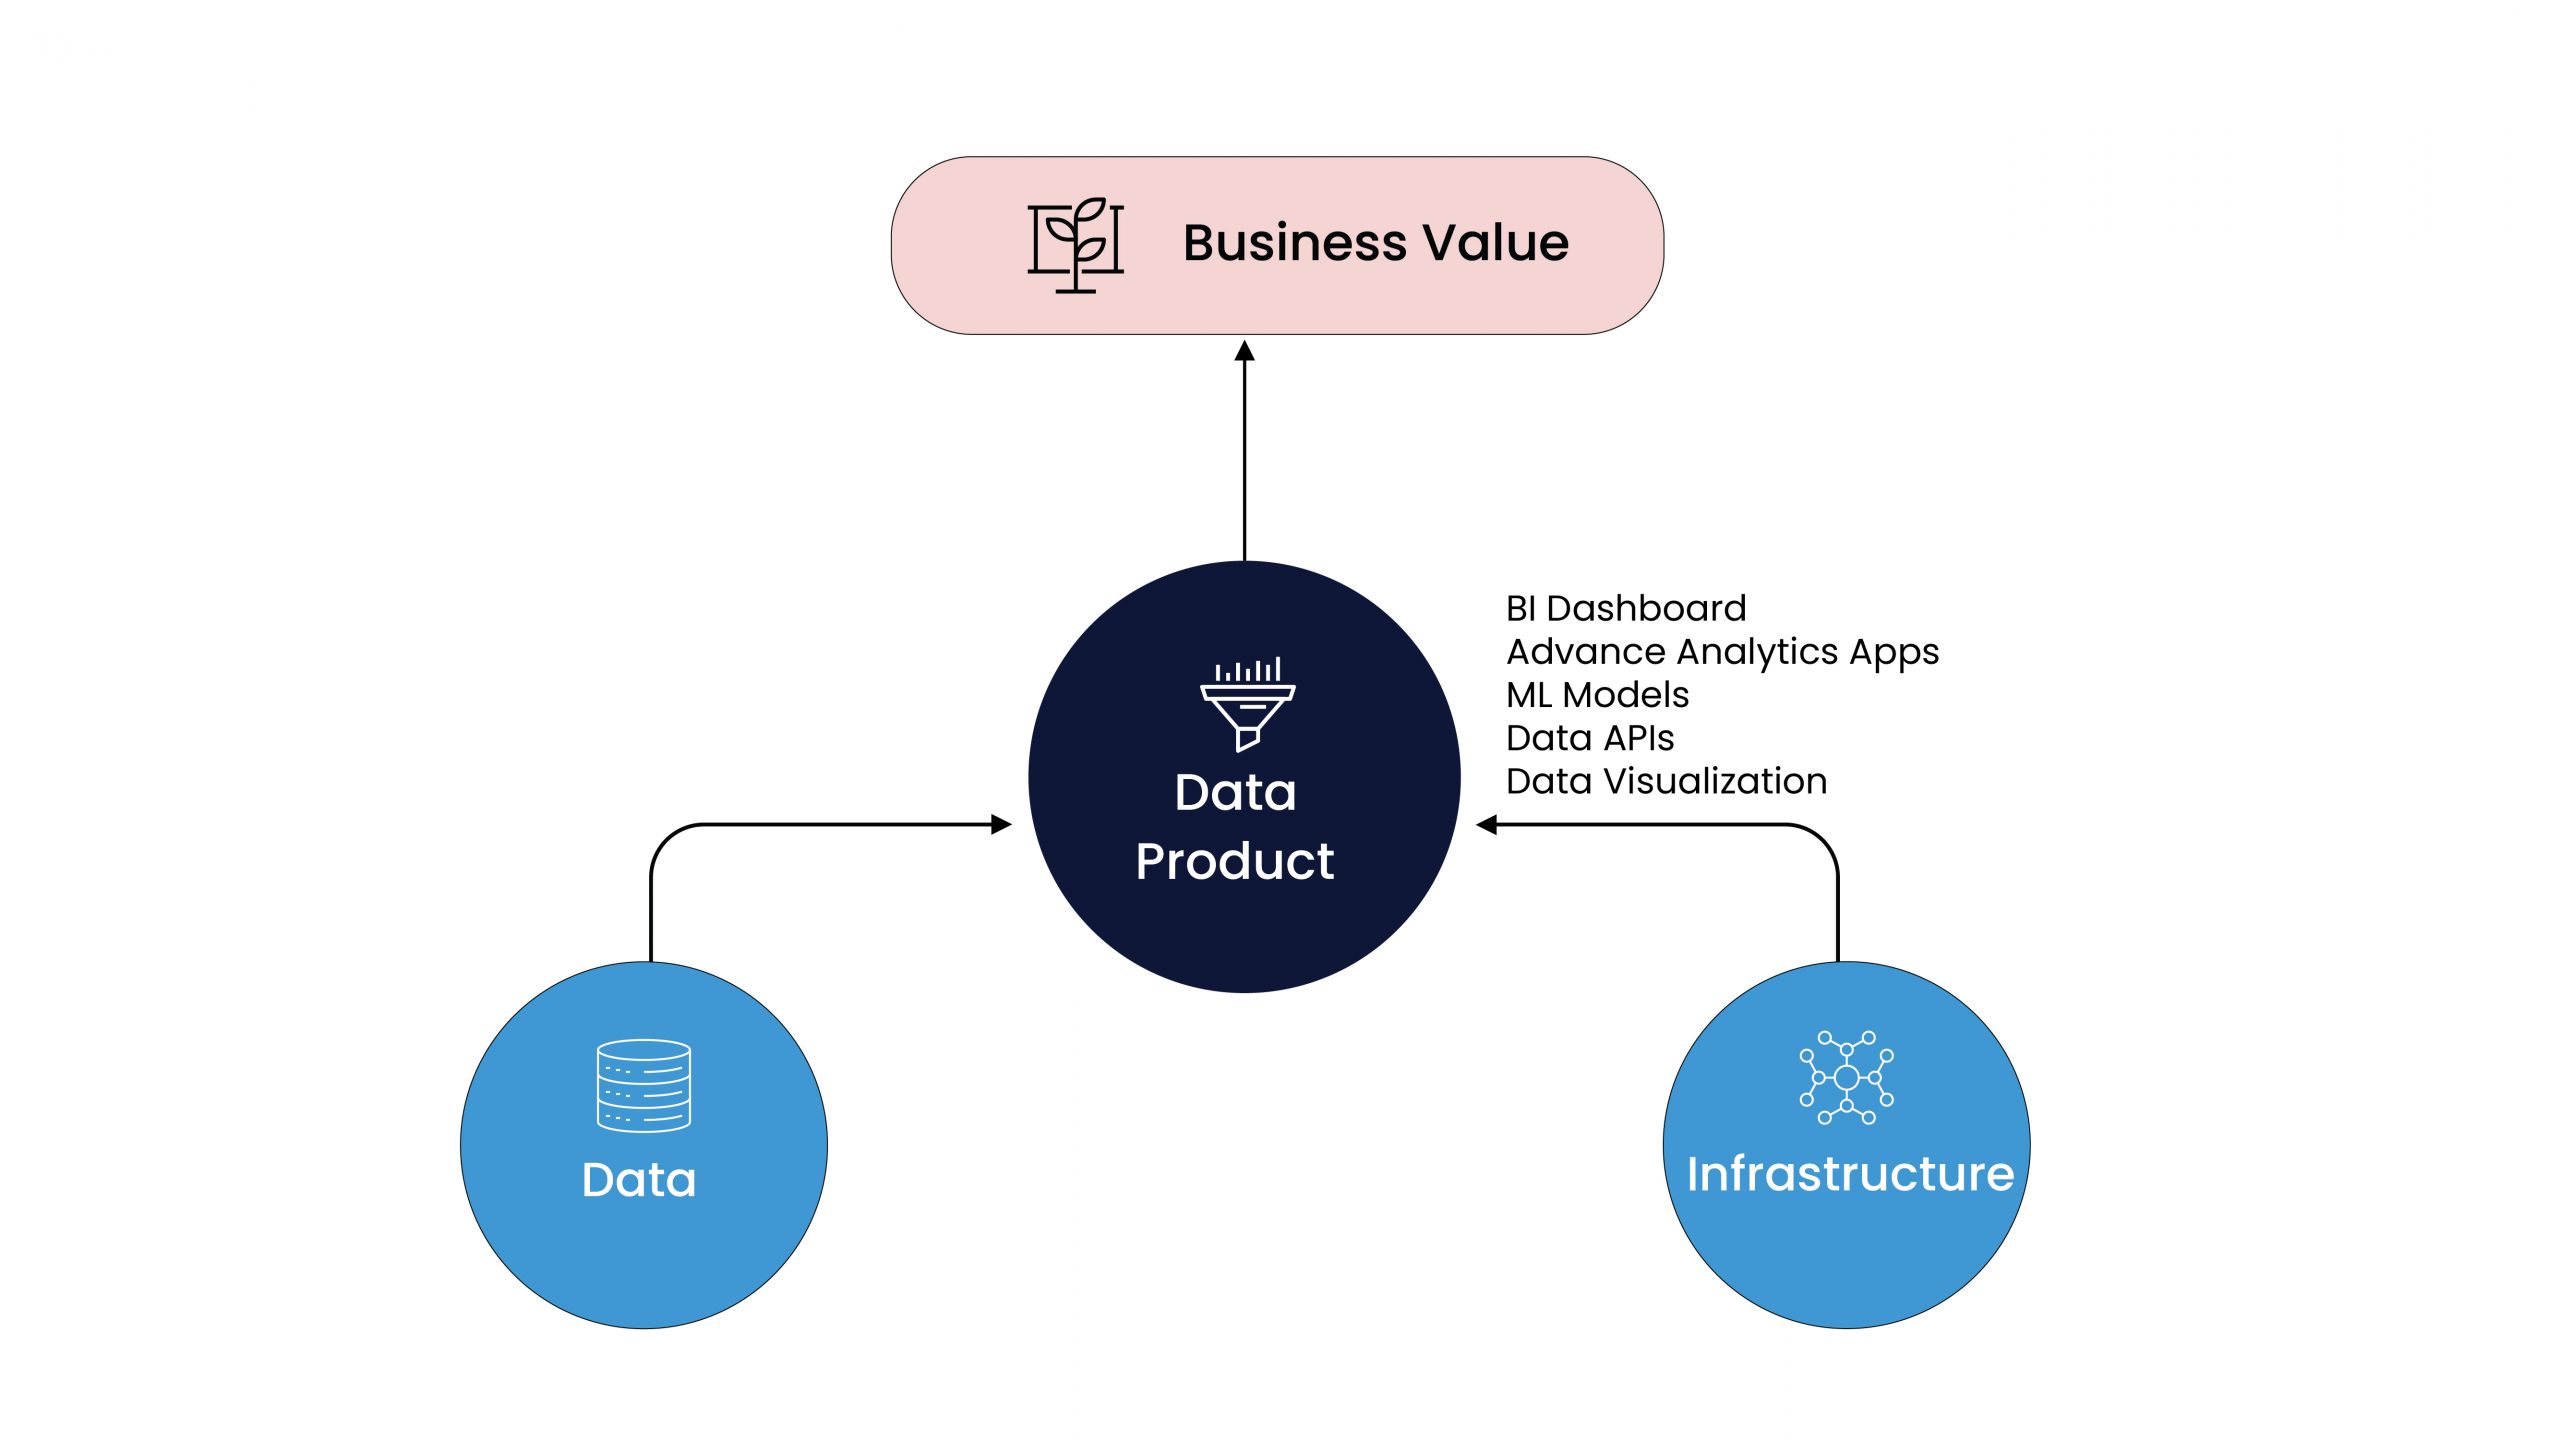 A data product bridges the infrastructure, data and end-user value.